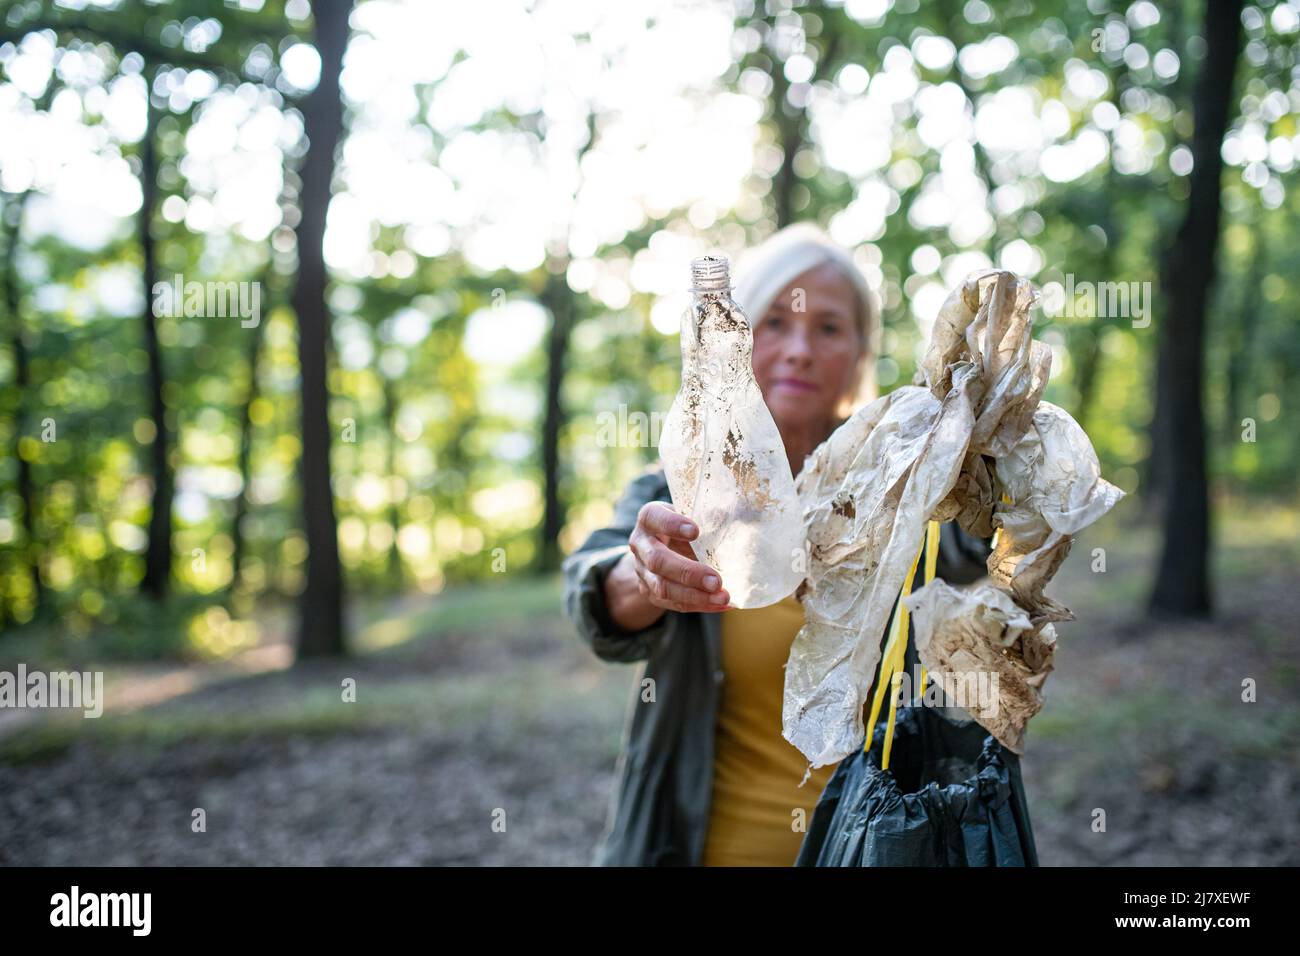 Senior woman ecologist with bin bag picking up waste outdoors in forest. Stock Photo